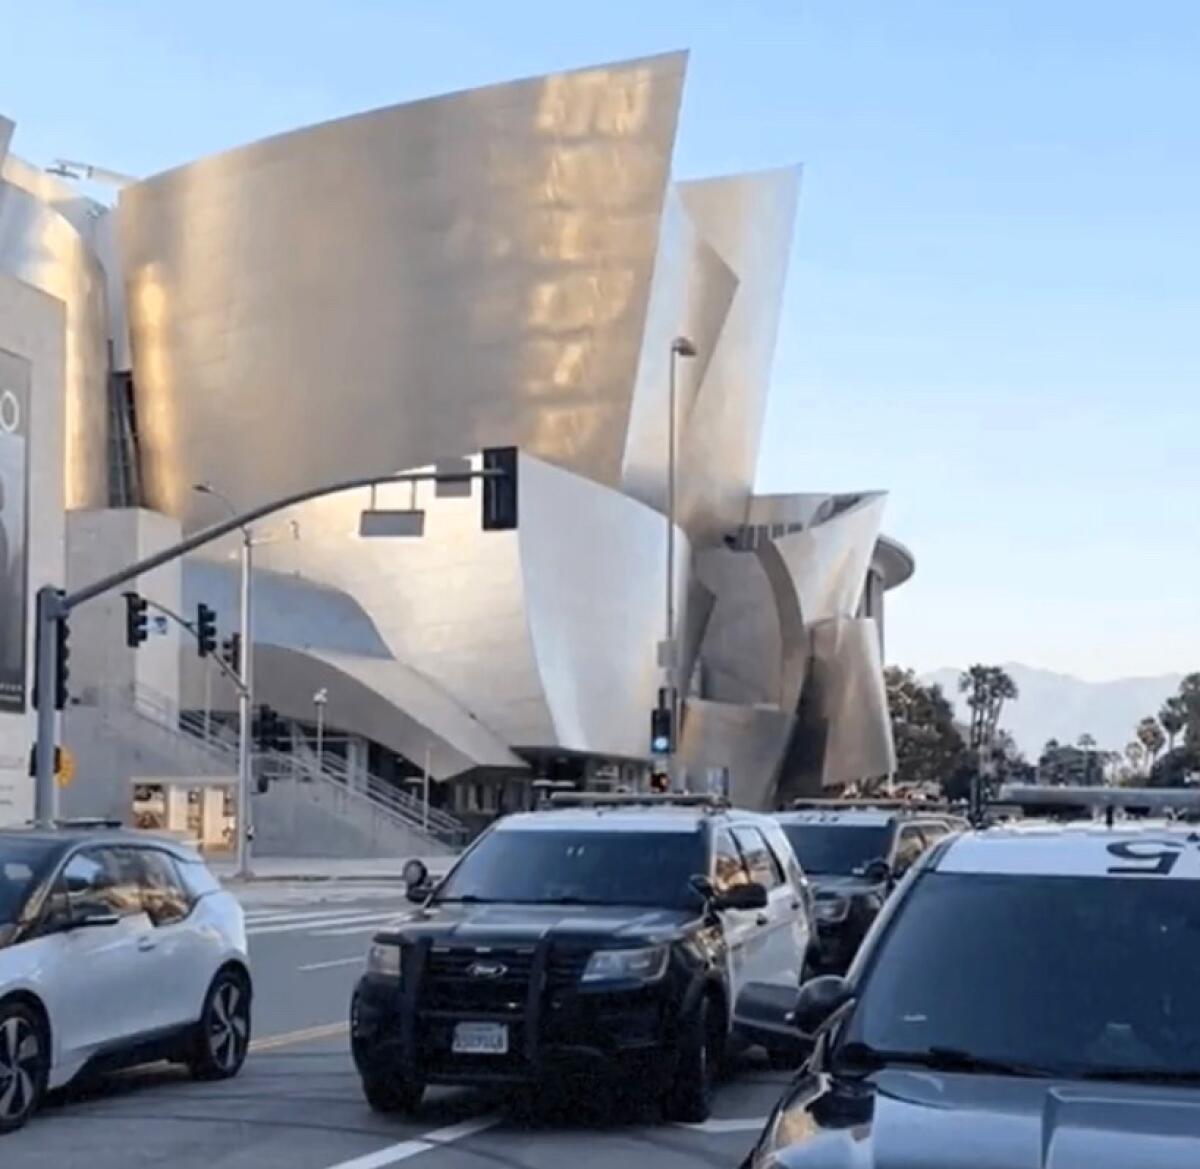 Police patrol vehicles are seen outside the Disney Concert Hall venue at dusk.